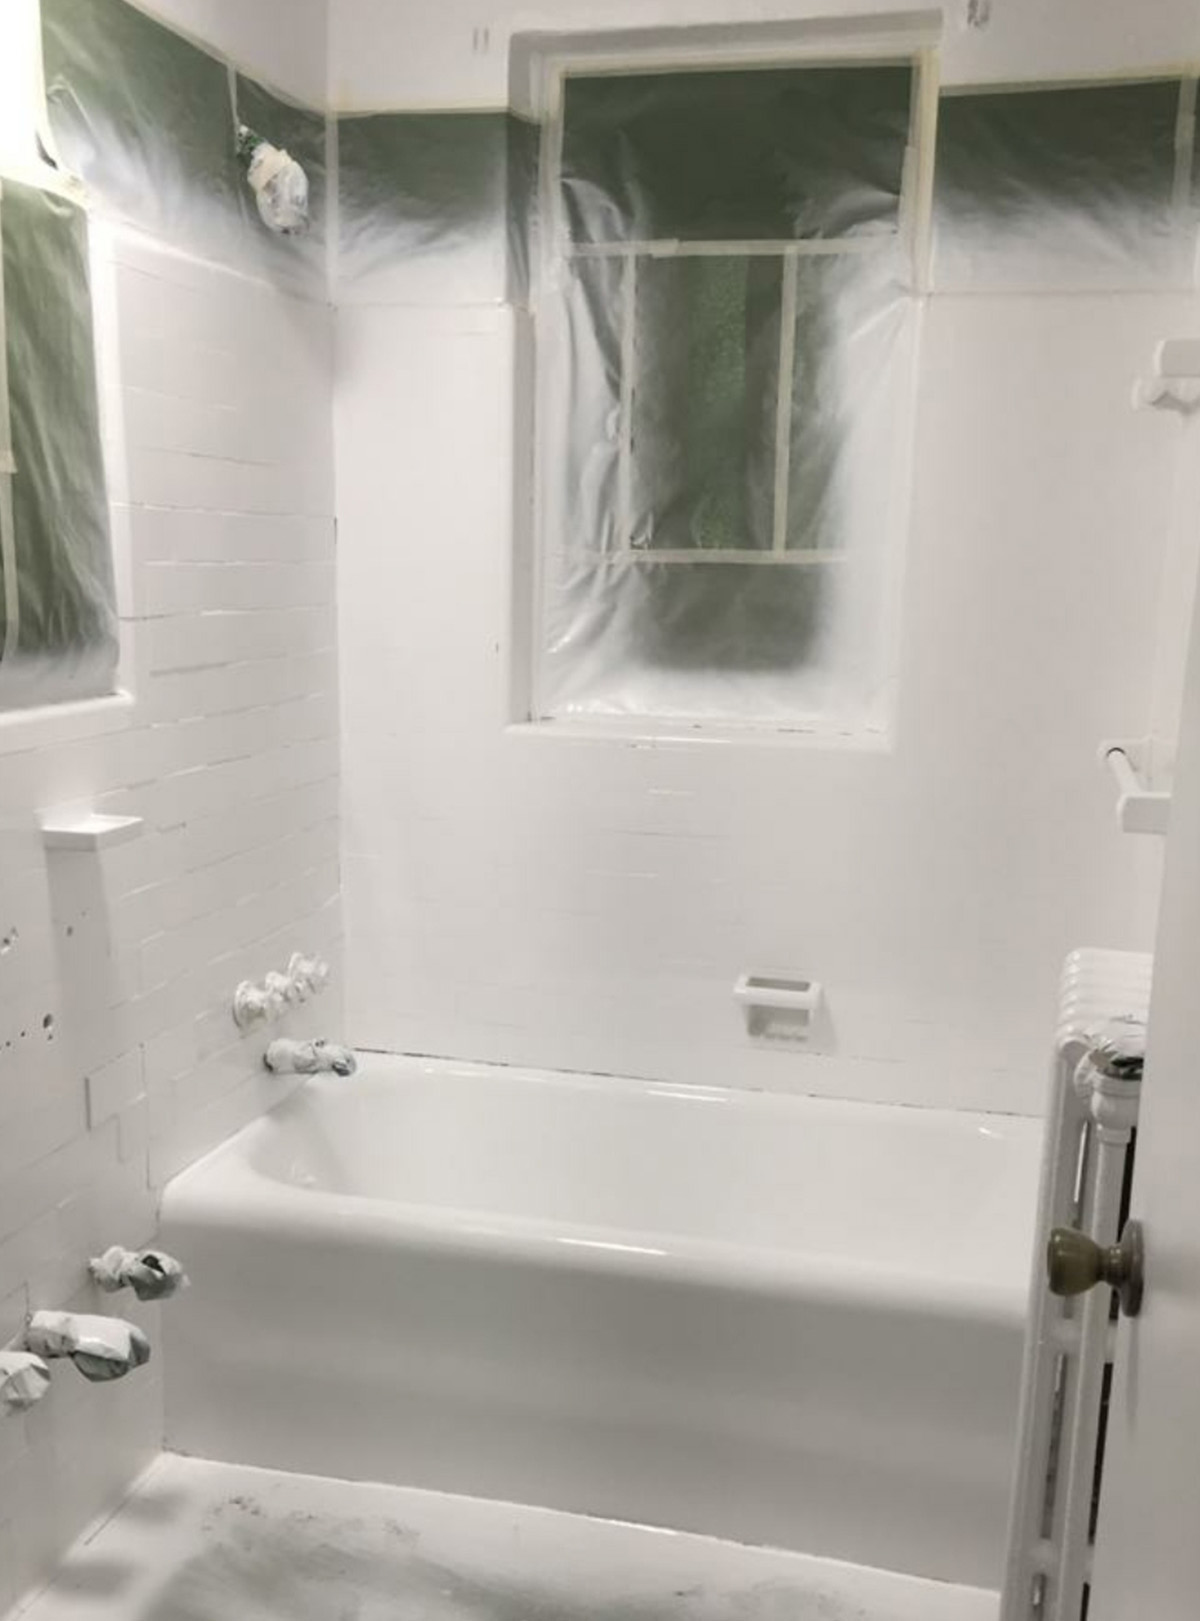 Shower and Bathroom Restoration Services in Fairfield, CT